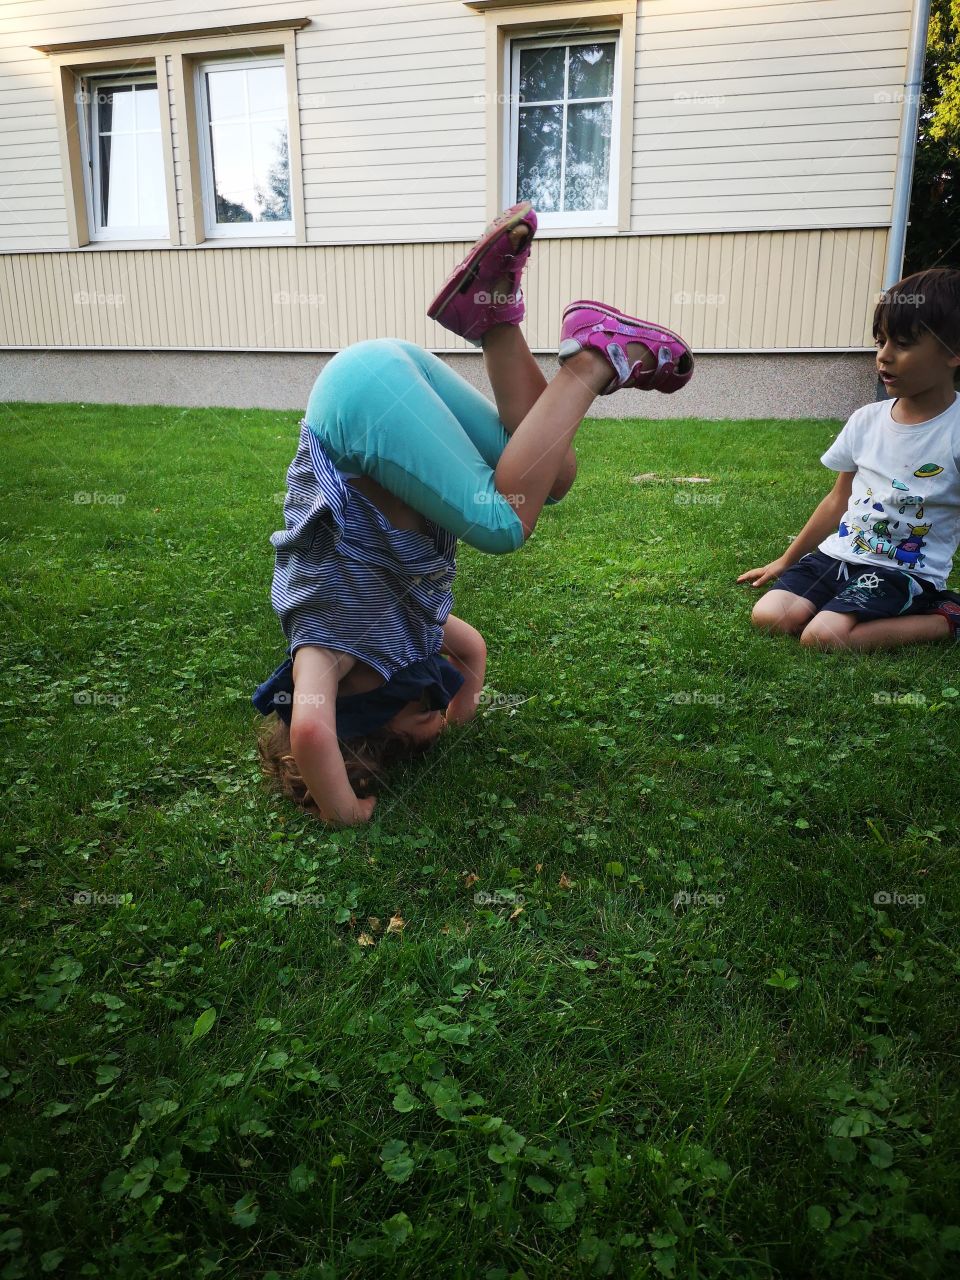 Girl standing on her head brother watching